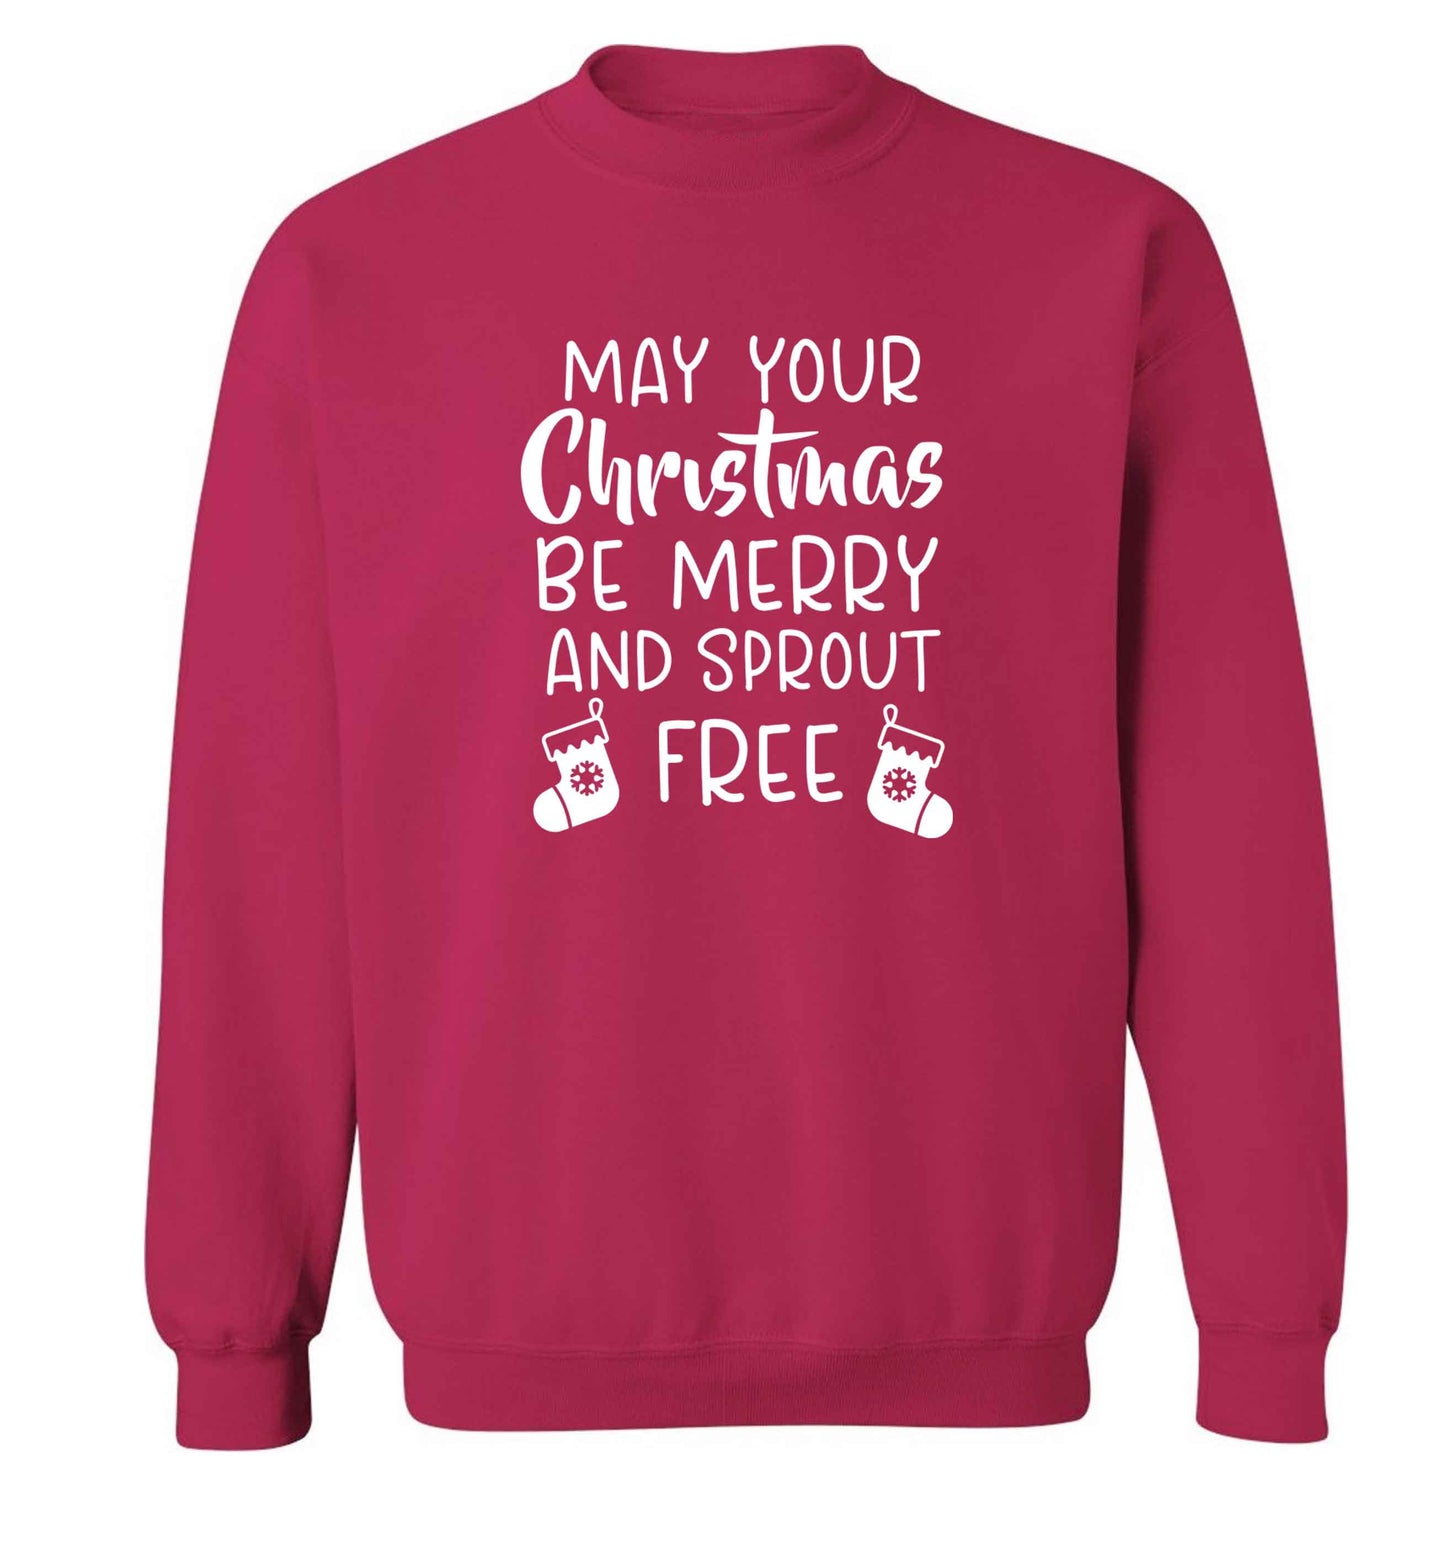 May your Christmas be merry and sprout free adult's unisex pink sweater 2XL